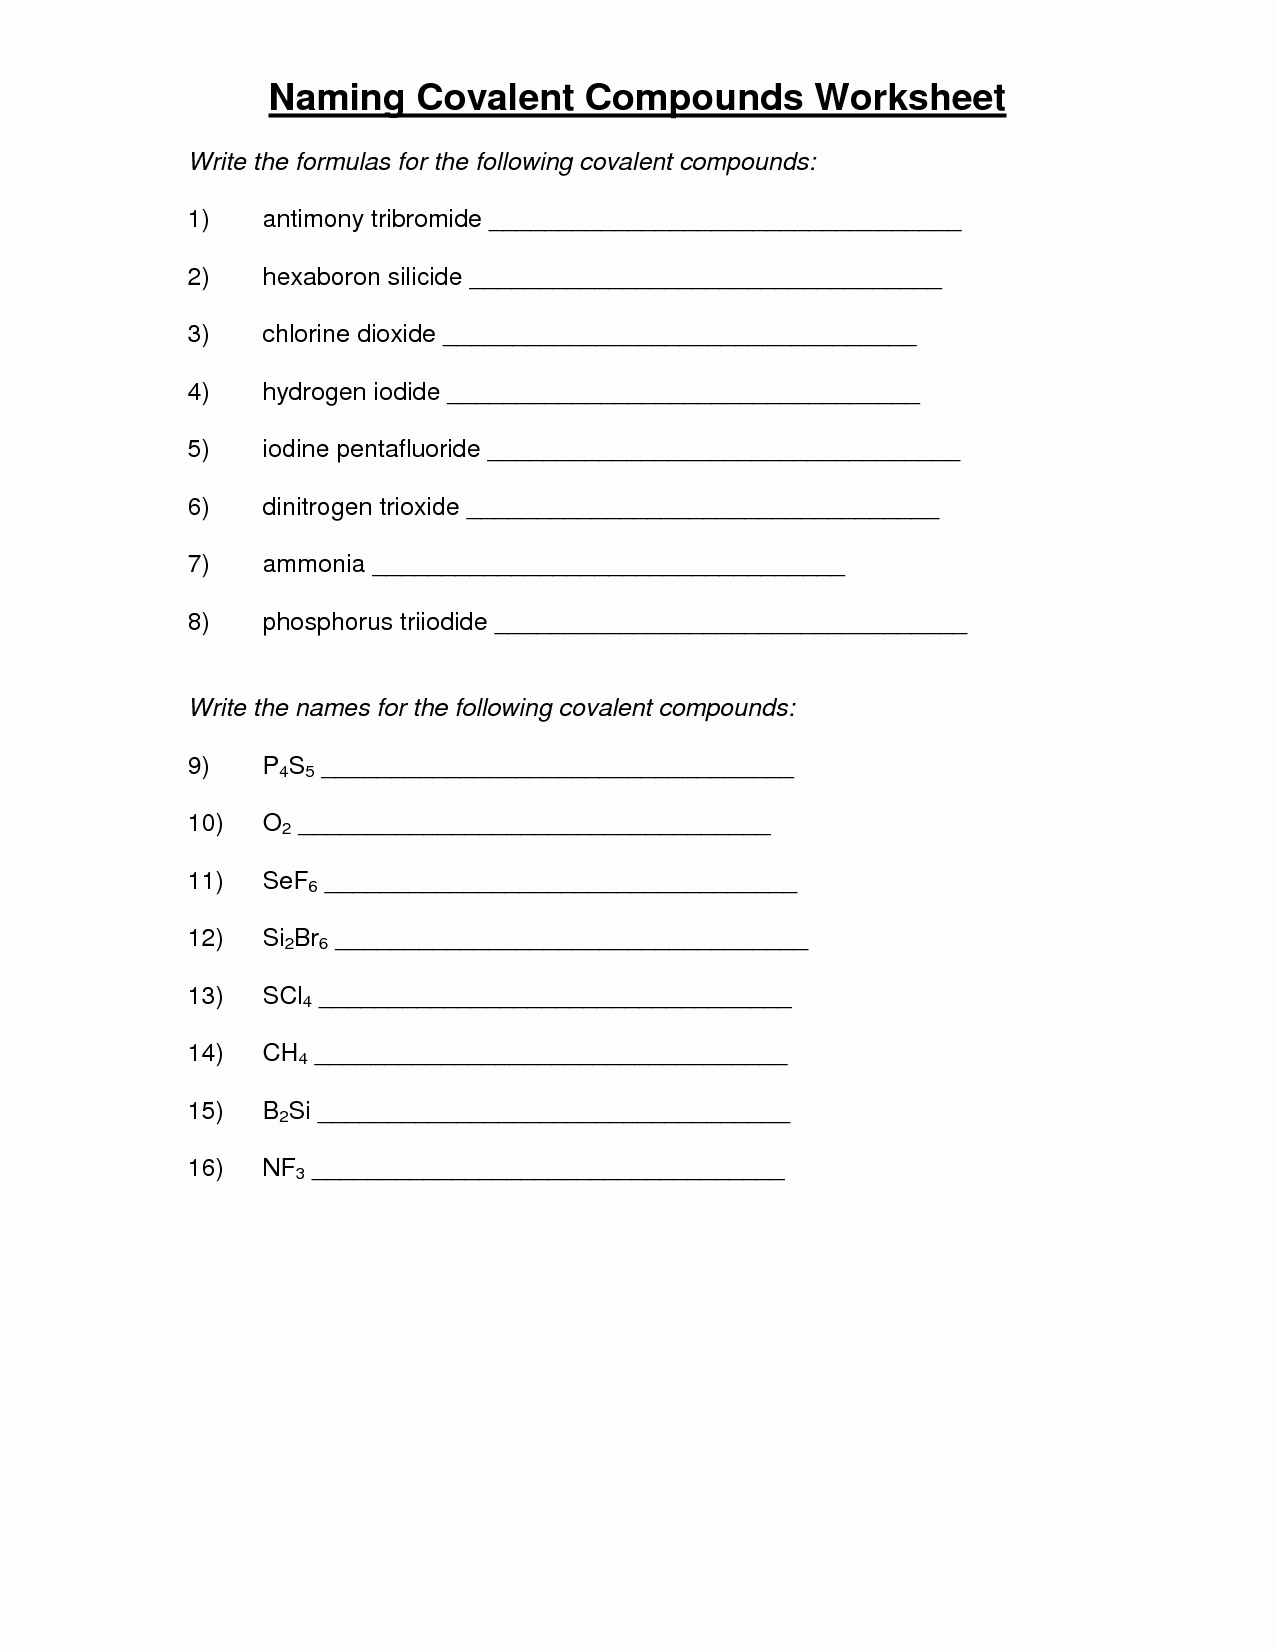 Naming Molecular Compounds Worksheet Answers Elegant 15 Best Of Naming Pounds Worksheet Key